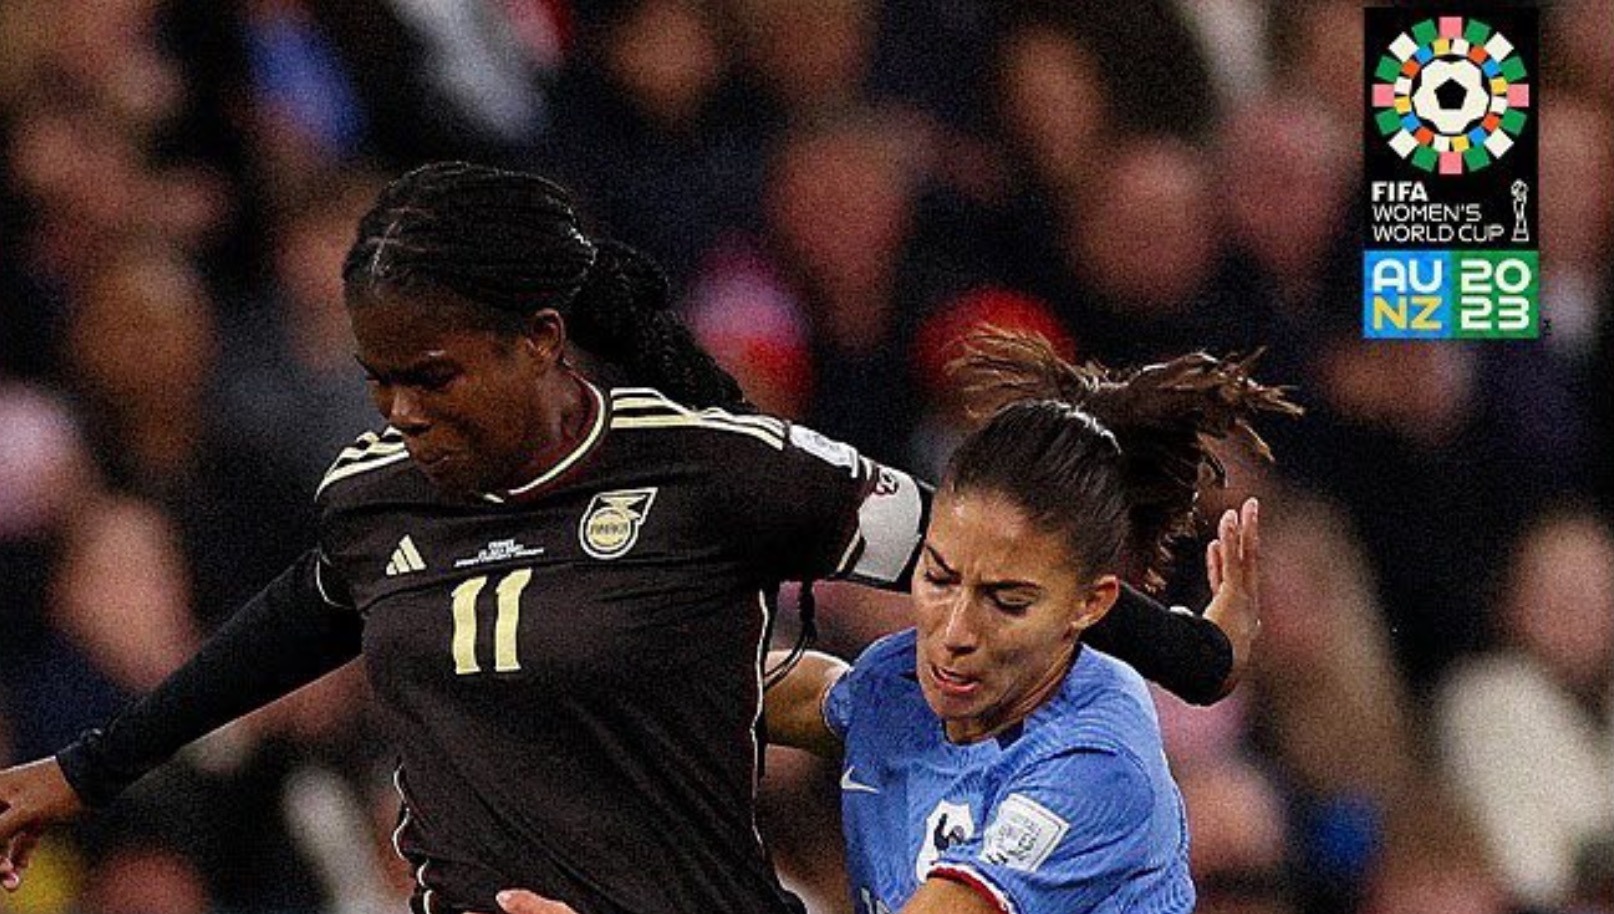 Jamaica 0-0 Draw with France Earns Historic Point In Women's World Cup